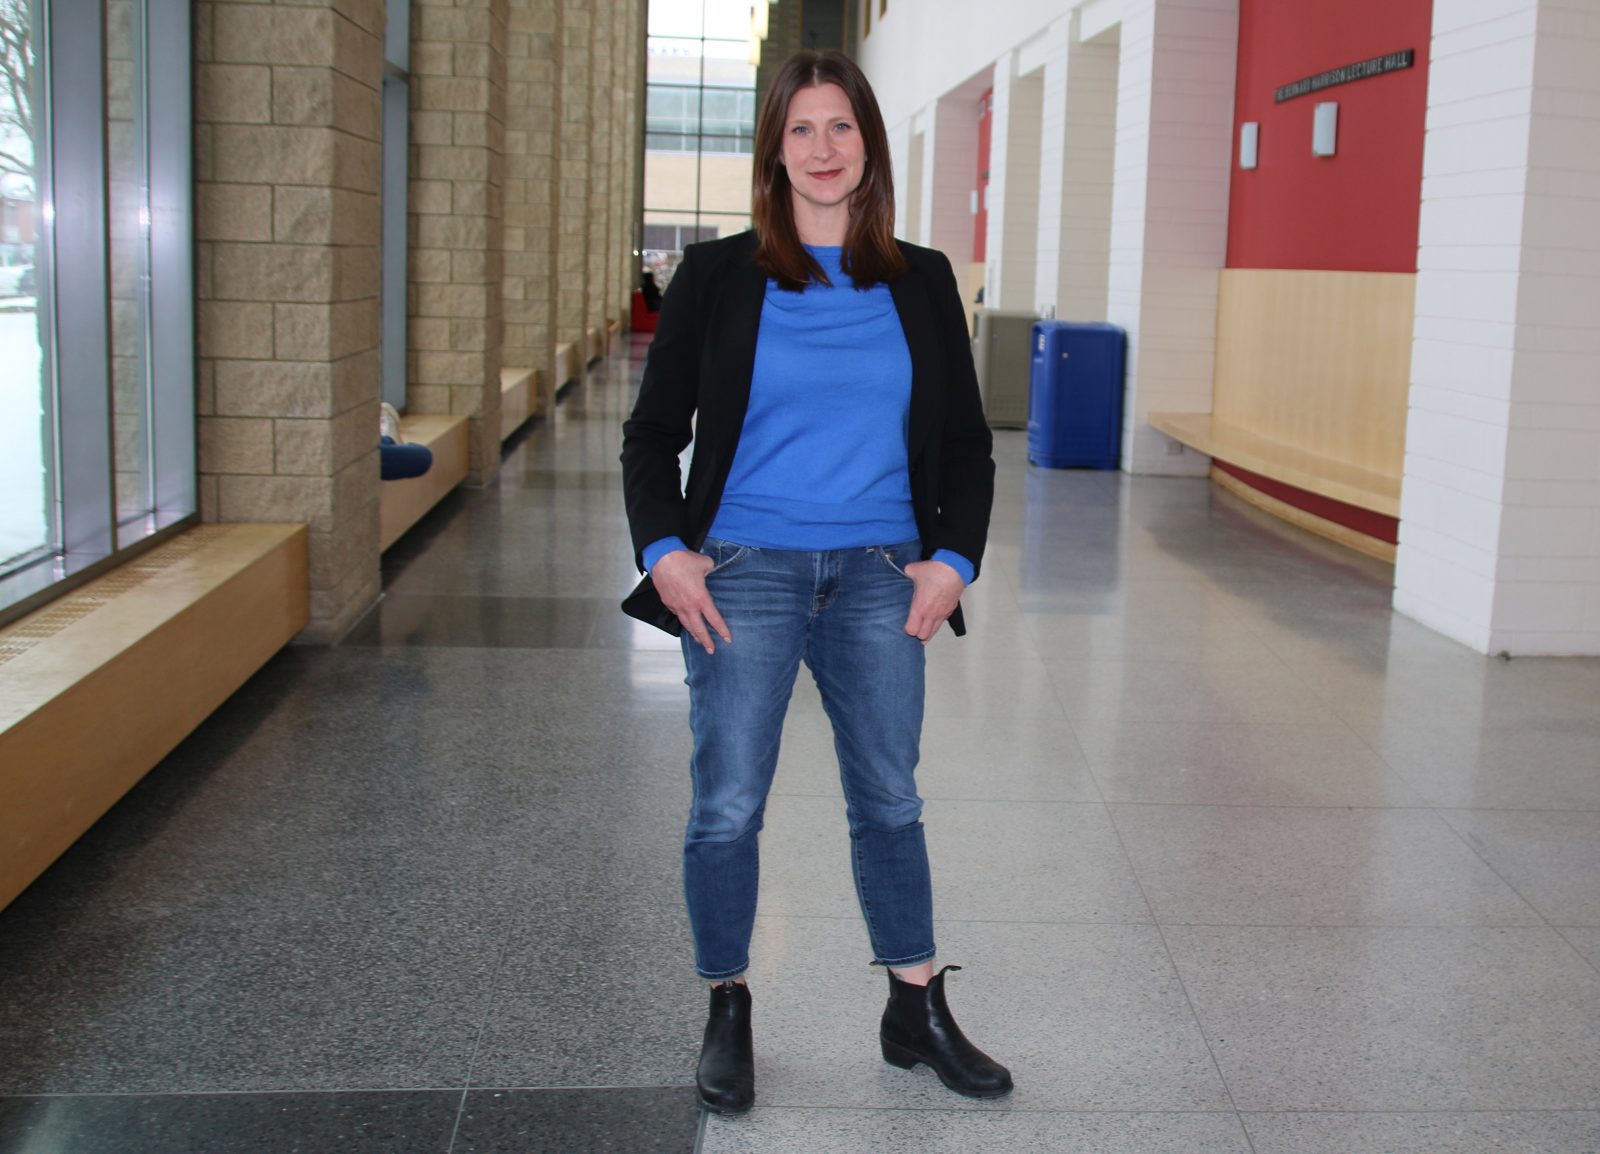 A woman in a blue shirt stands in an indoor hallway.